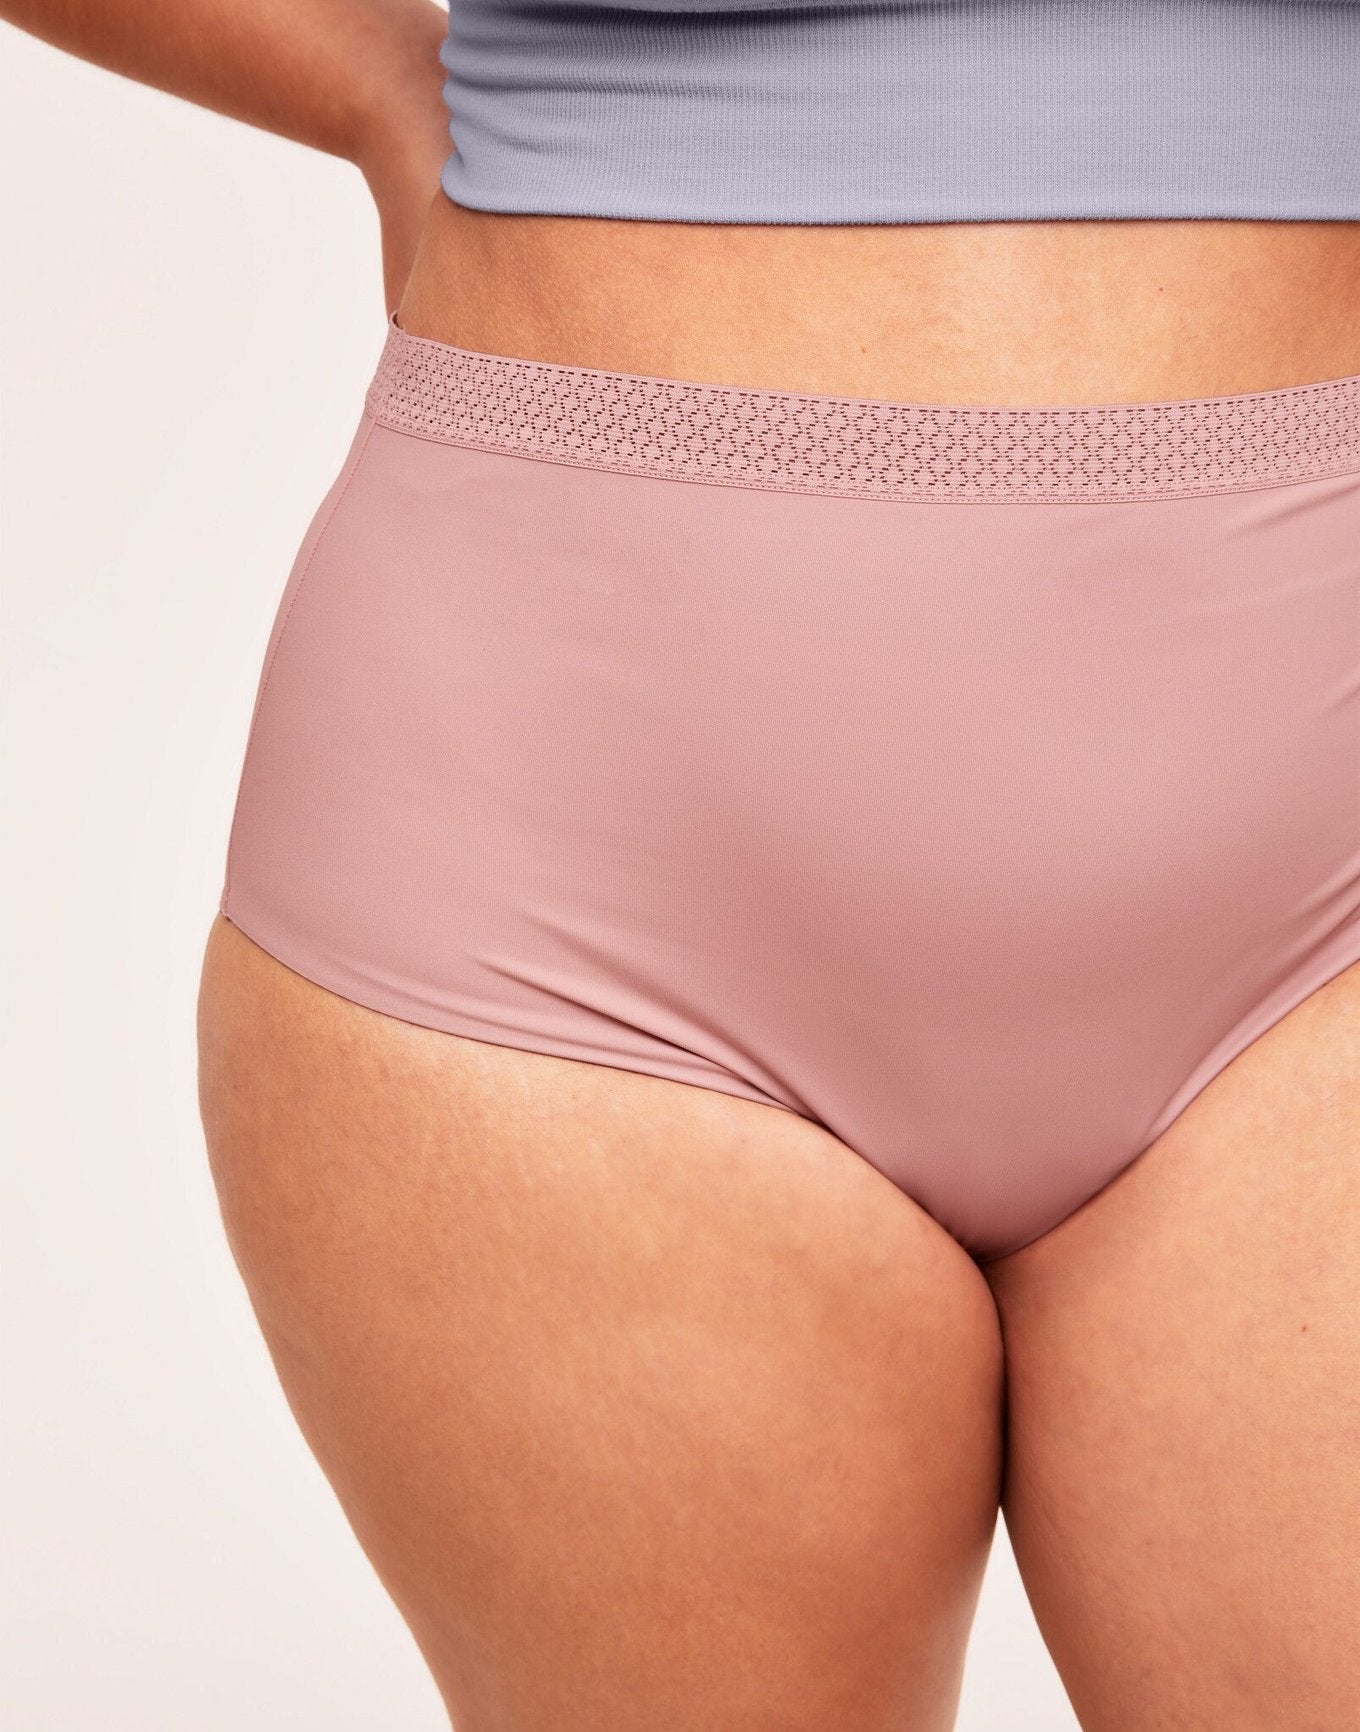 Blossom Peach Color Cutie Girl Panties (color may vary)